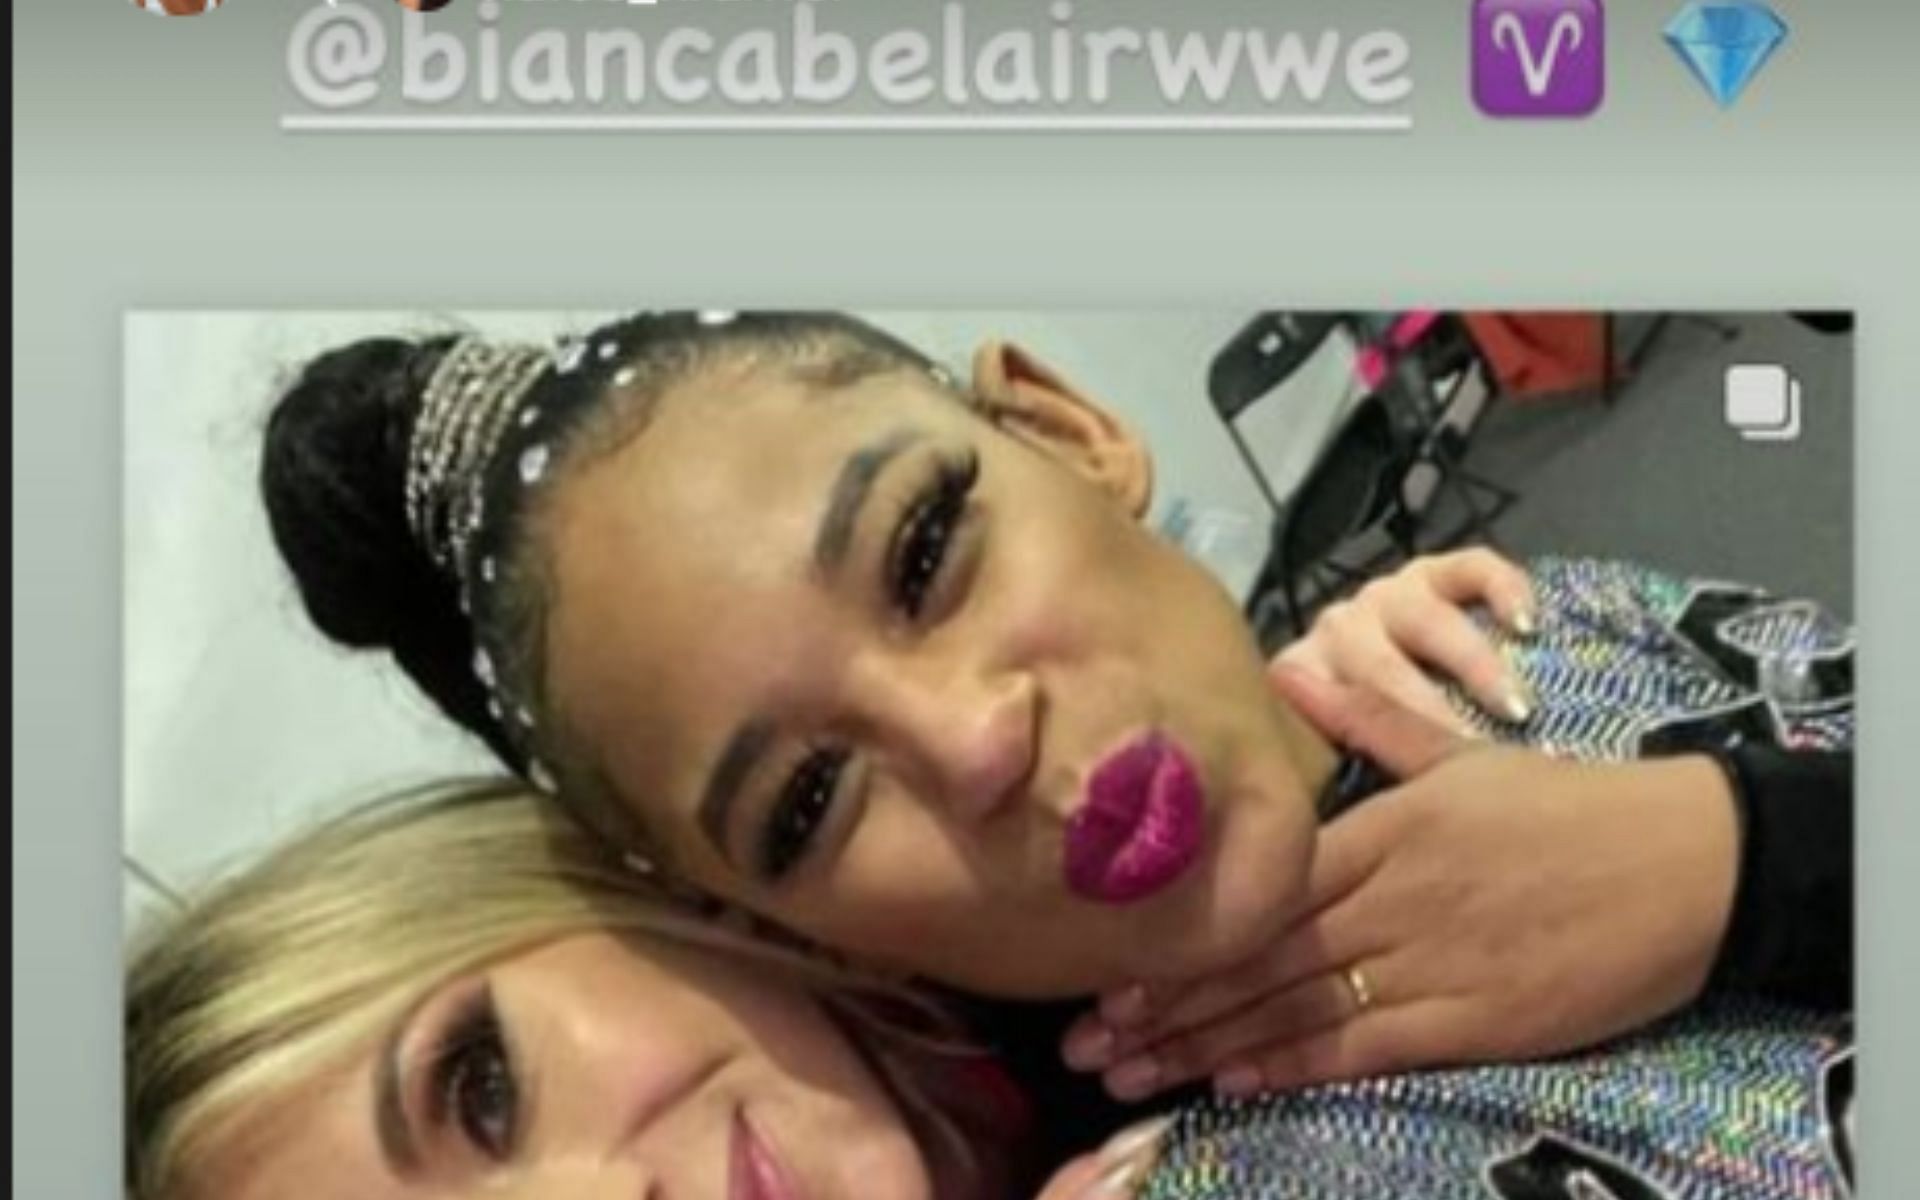 Charlotte Flair wrote #WeLoveBianca in support.